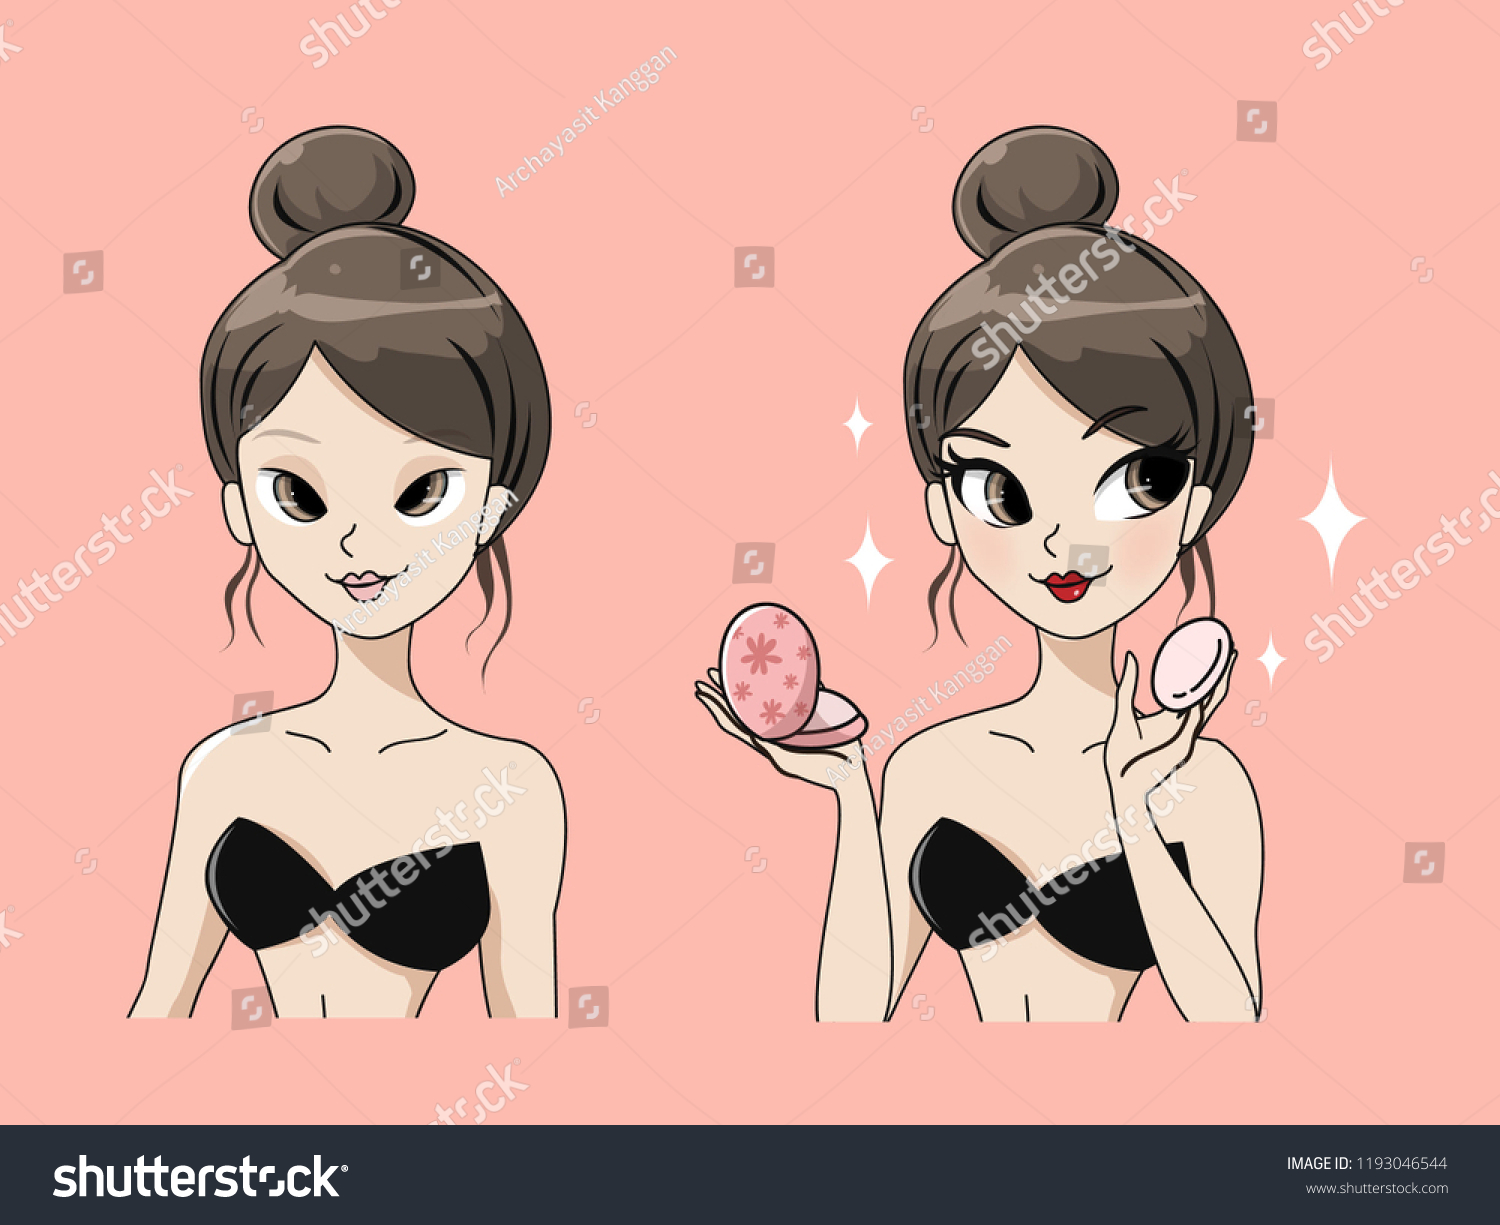 SVG of Lady before makeup And after makeup Make it look beautiful svg